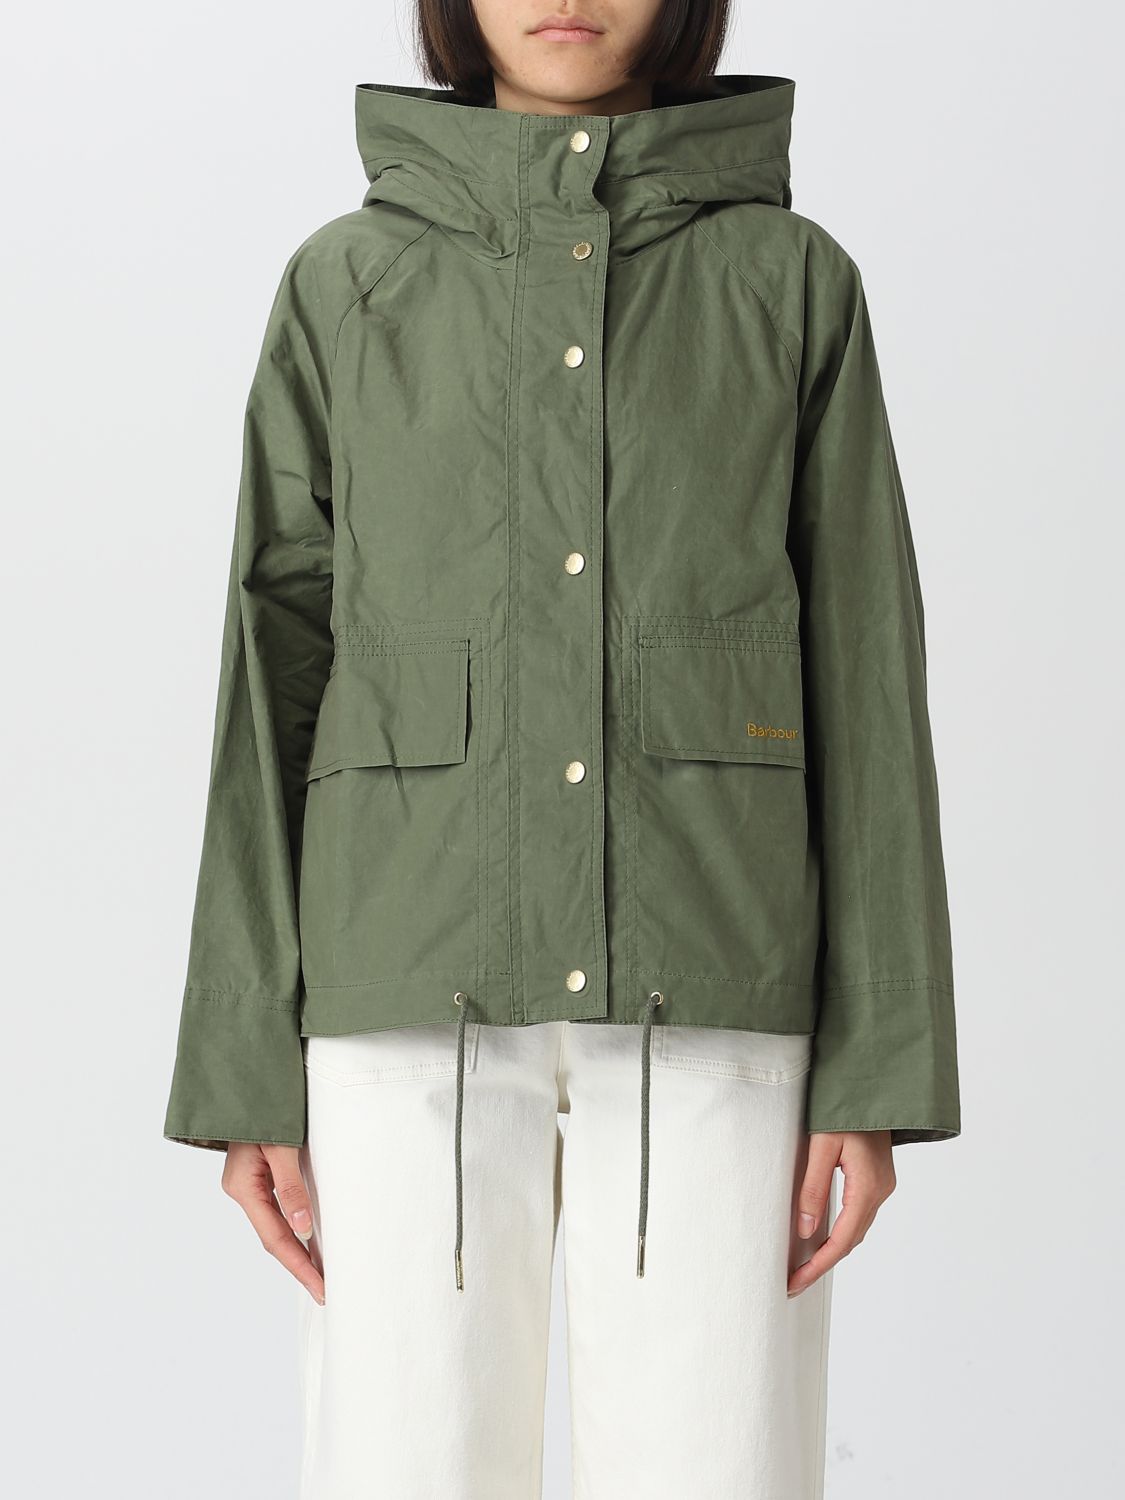 BARBOUR: for woman - Military | LSP0090 online on GIGLIO.COM